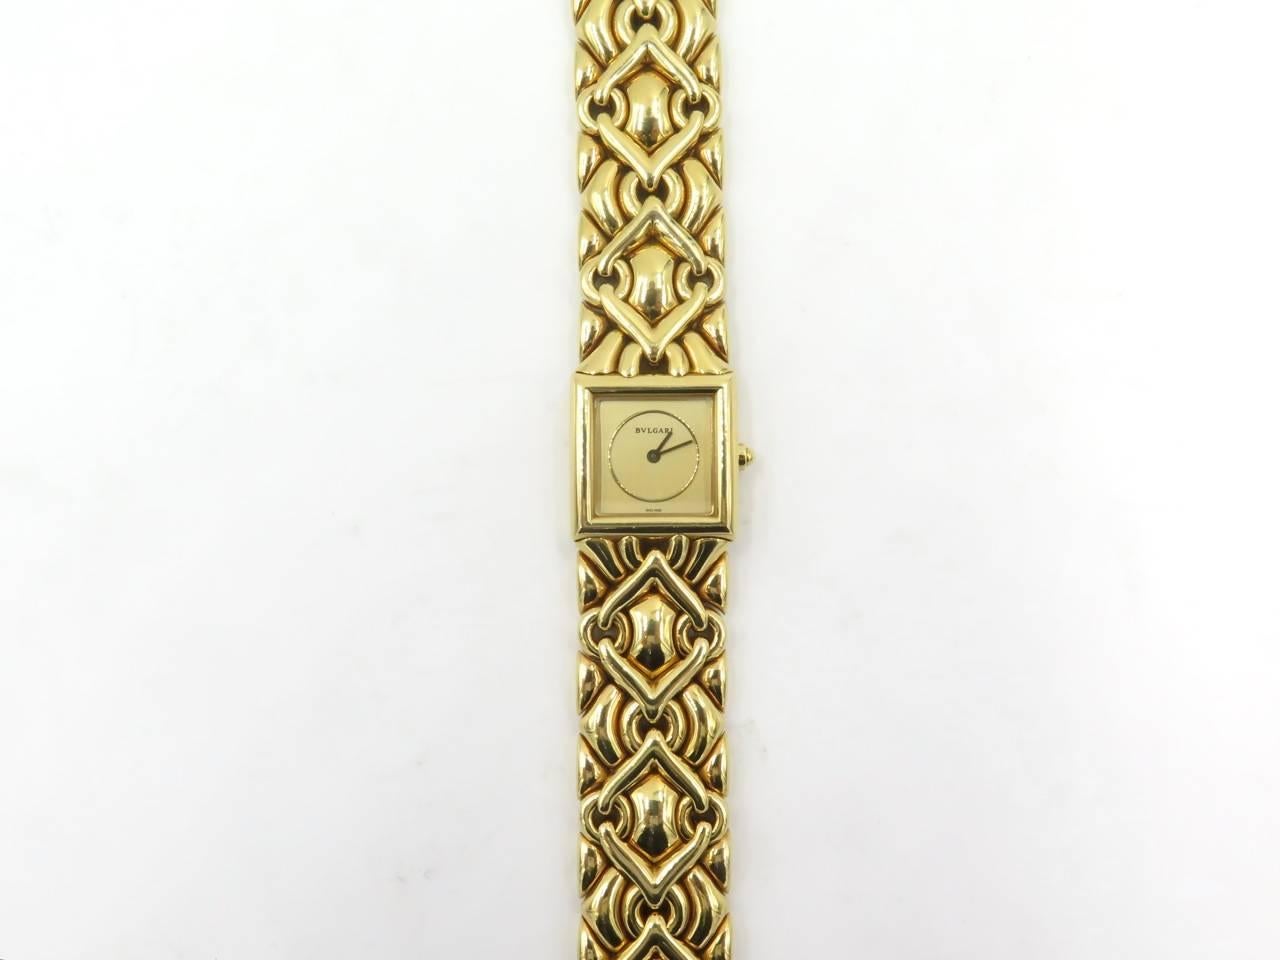 A ladies 18 karat yellow gold Trika watch.  Bulgari. Of quartz movement,  with a square gold tone dial, joined by a flexible polished gold bracelet of woven geometric design. Length of watch is approximately 6 1/2 inches. Gross weight is